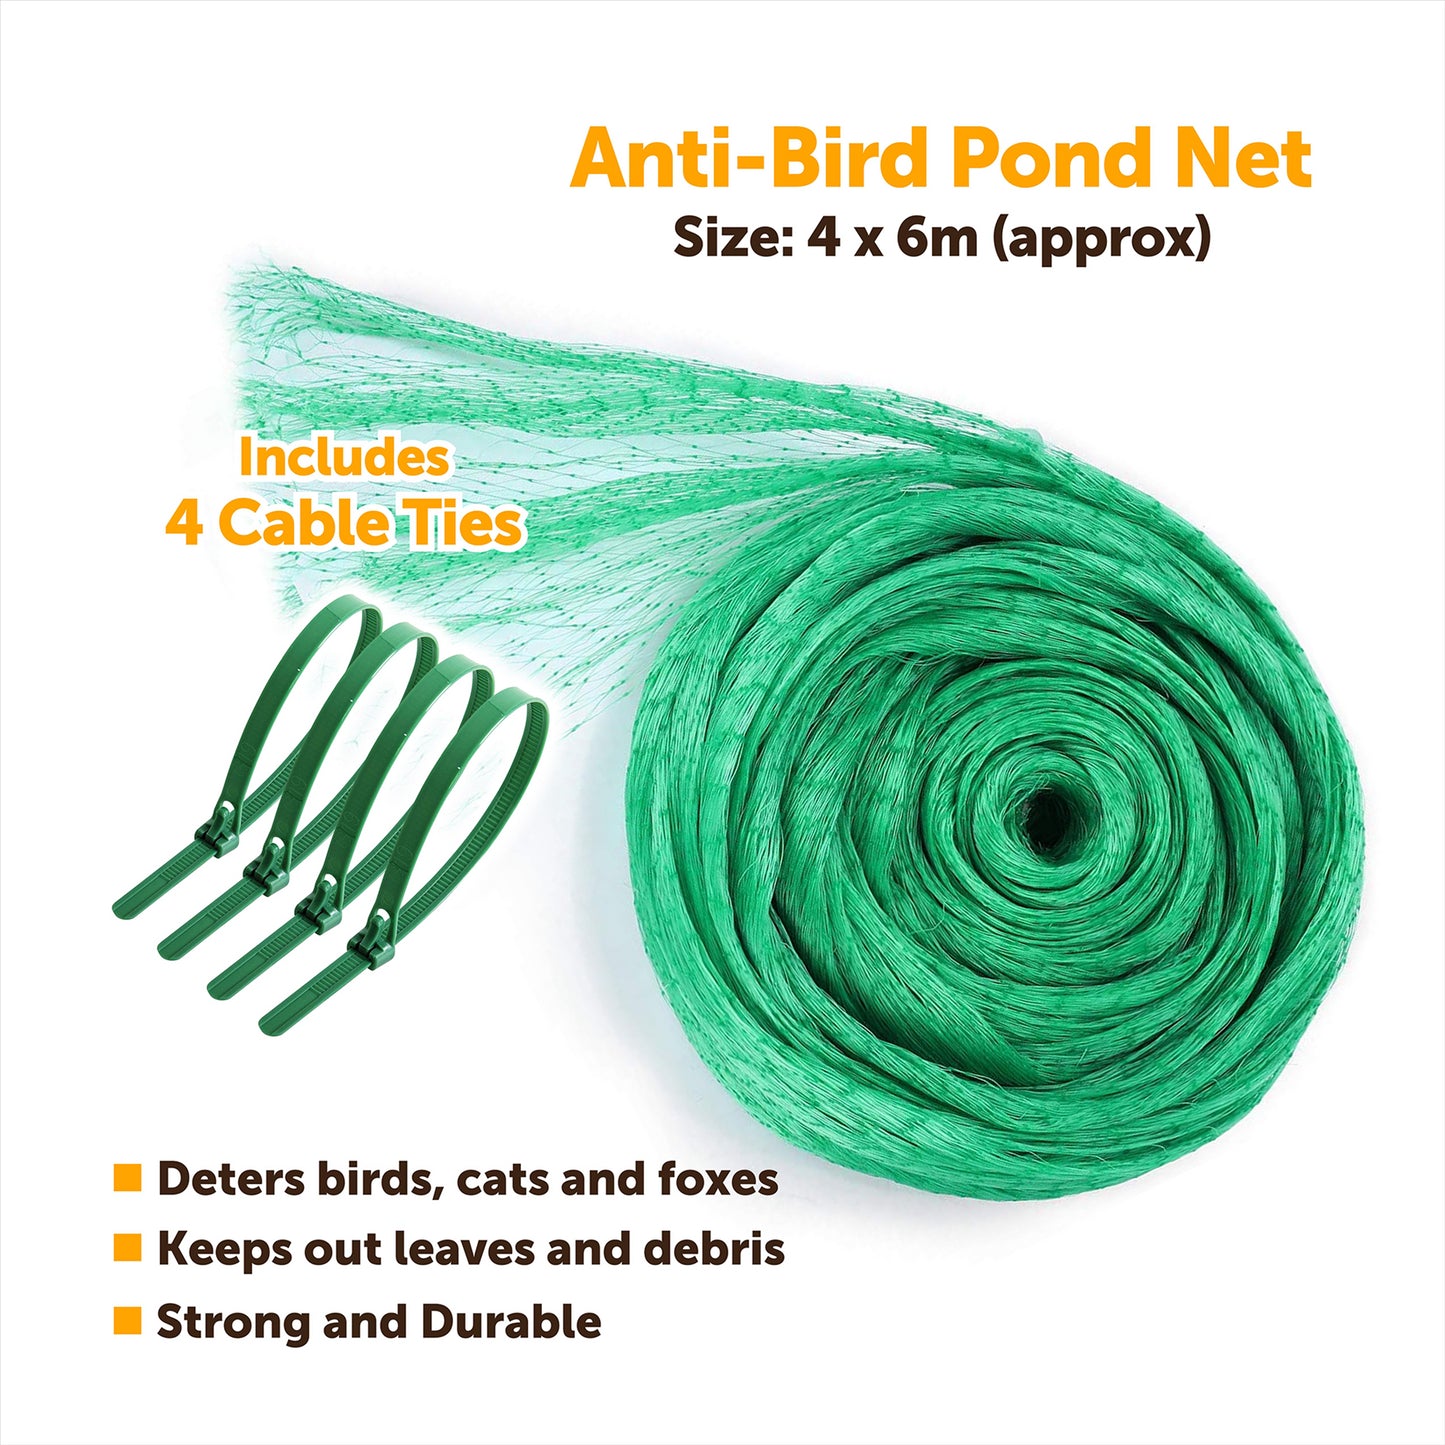 Protective Netting to Prevent Bird Access to Pond or Garden Area